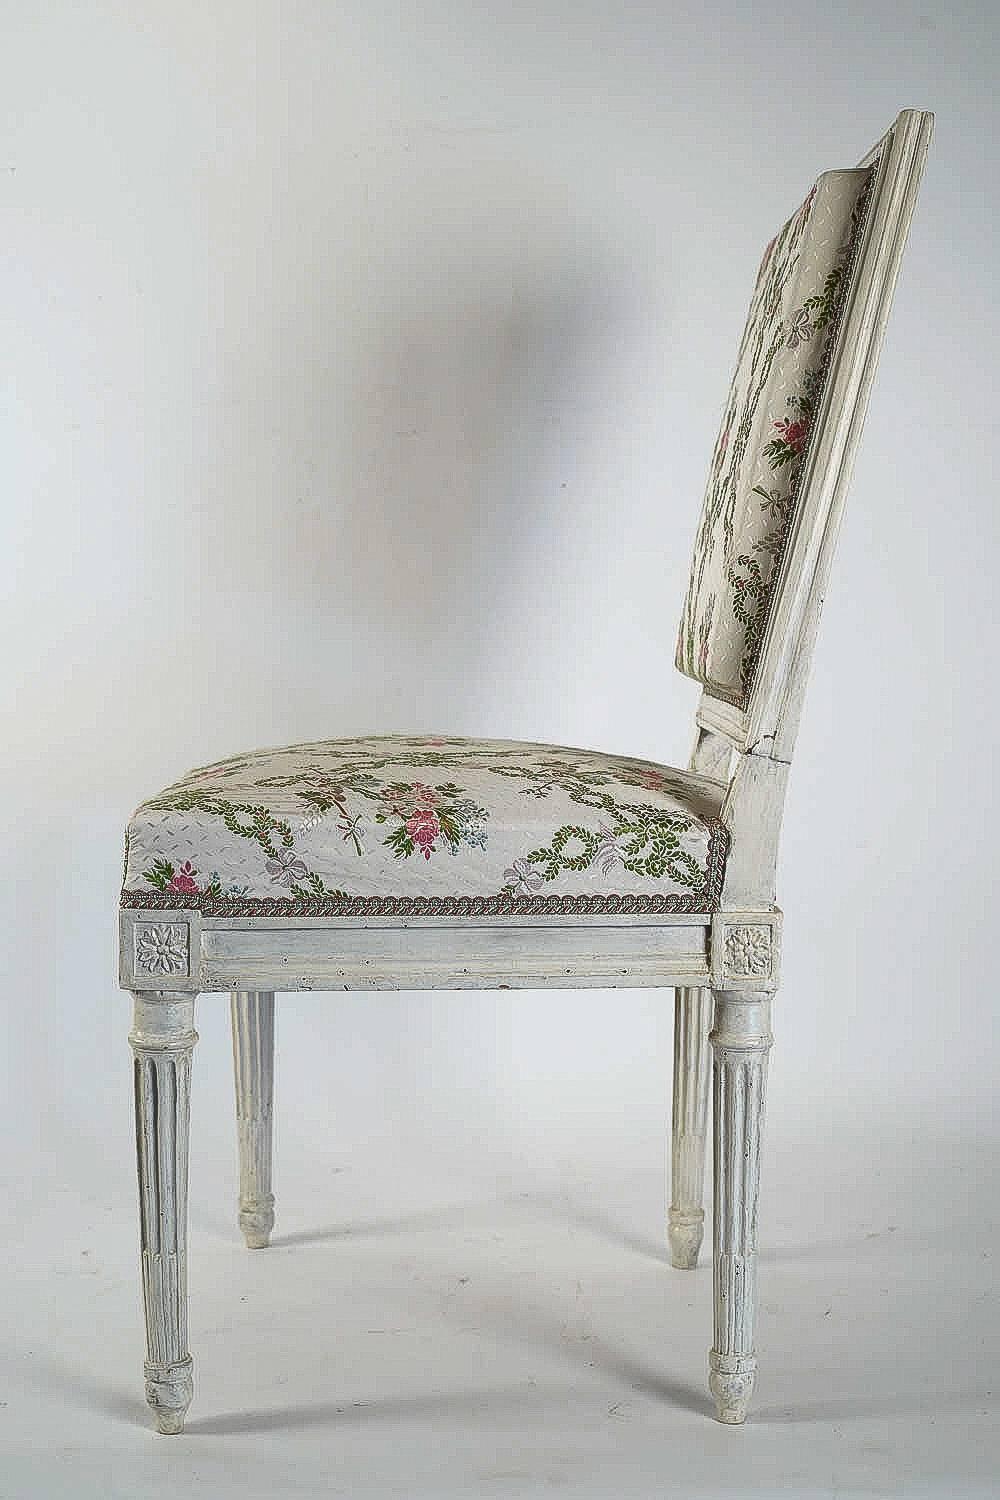 Fruitwood Pair of Chairs Late 18th Century Louis XVI Period by Georges Jacob, circa 1780